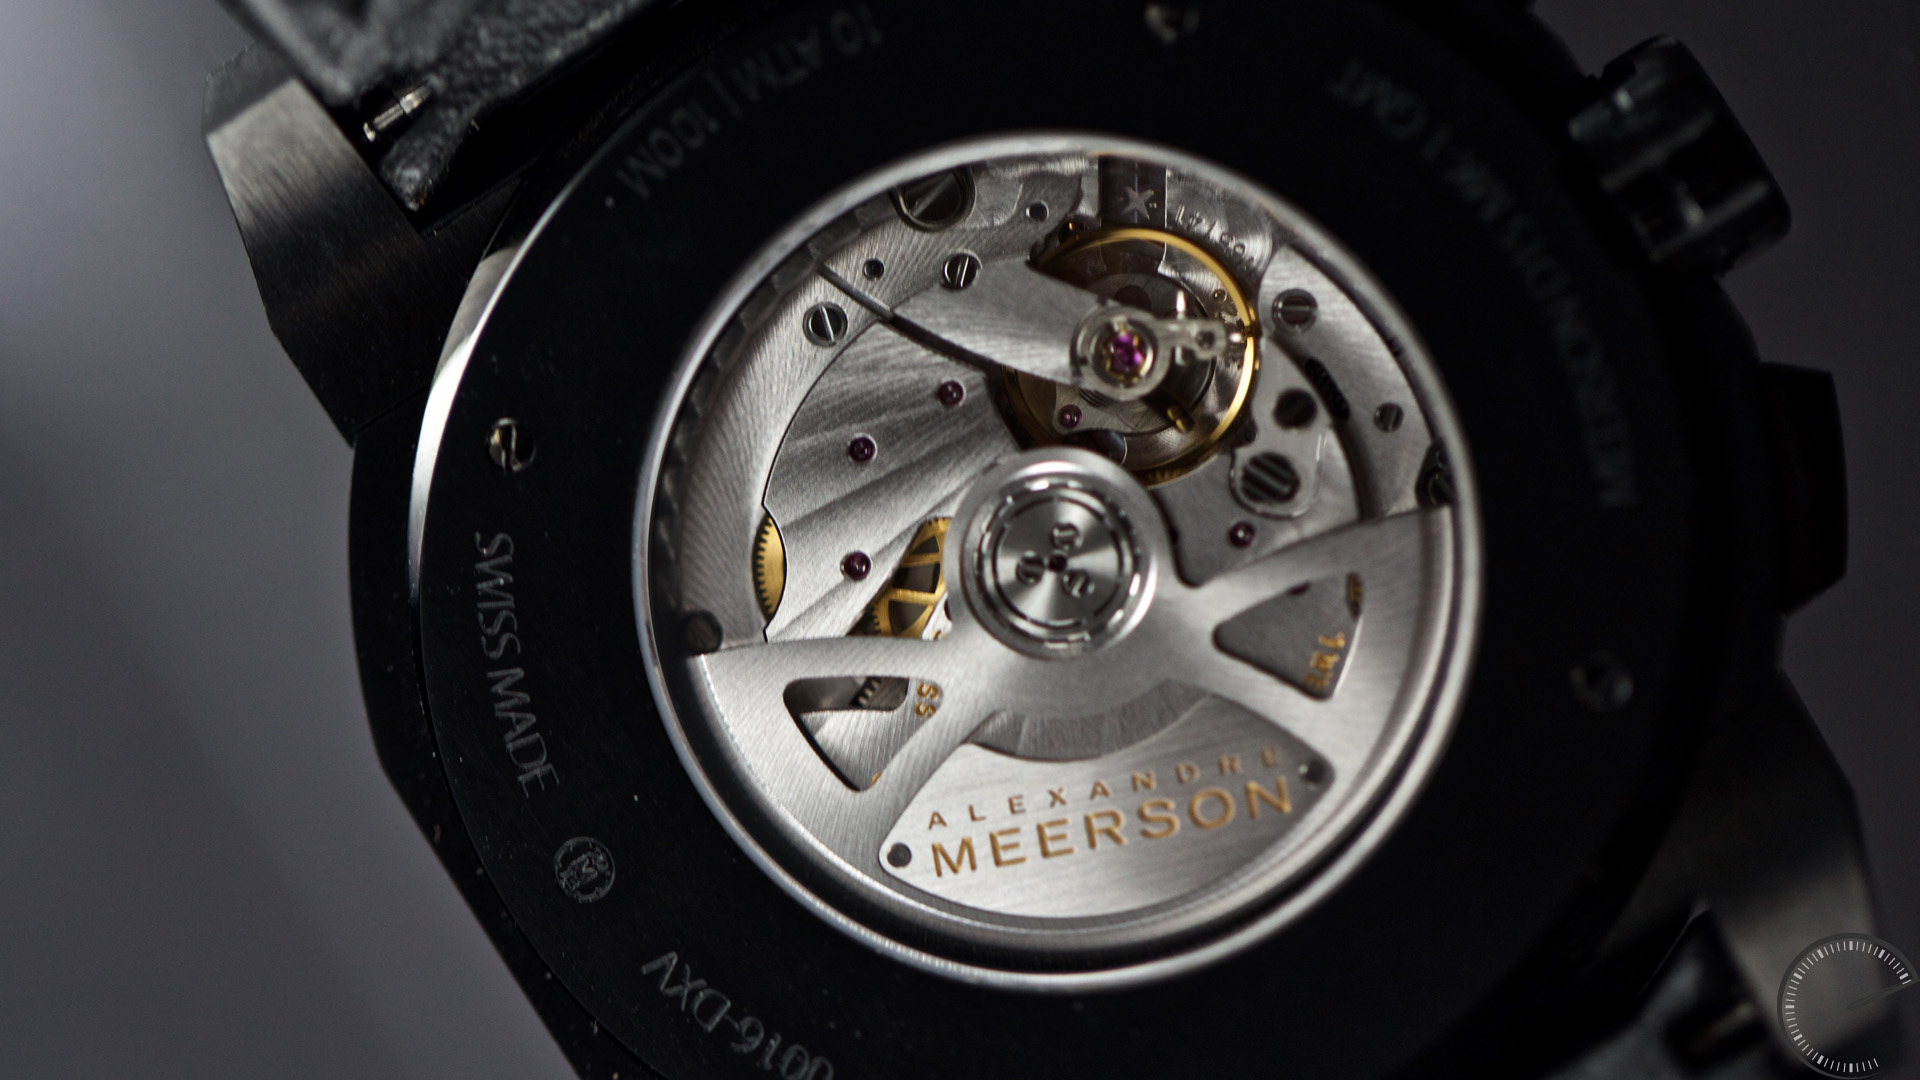 Meerson D15 MK-1 GMT Black ADLC - in-depth watch replica reviews by ESCAPEMENT magazine